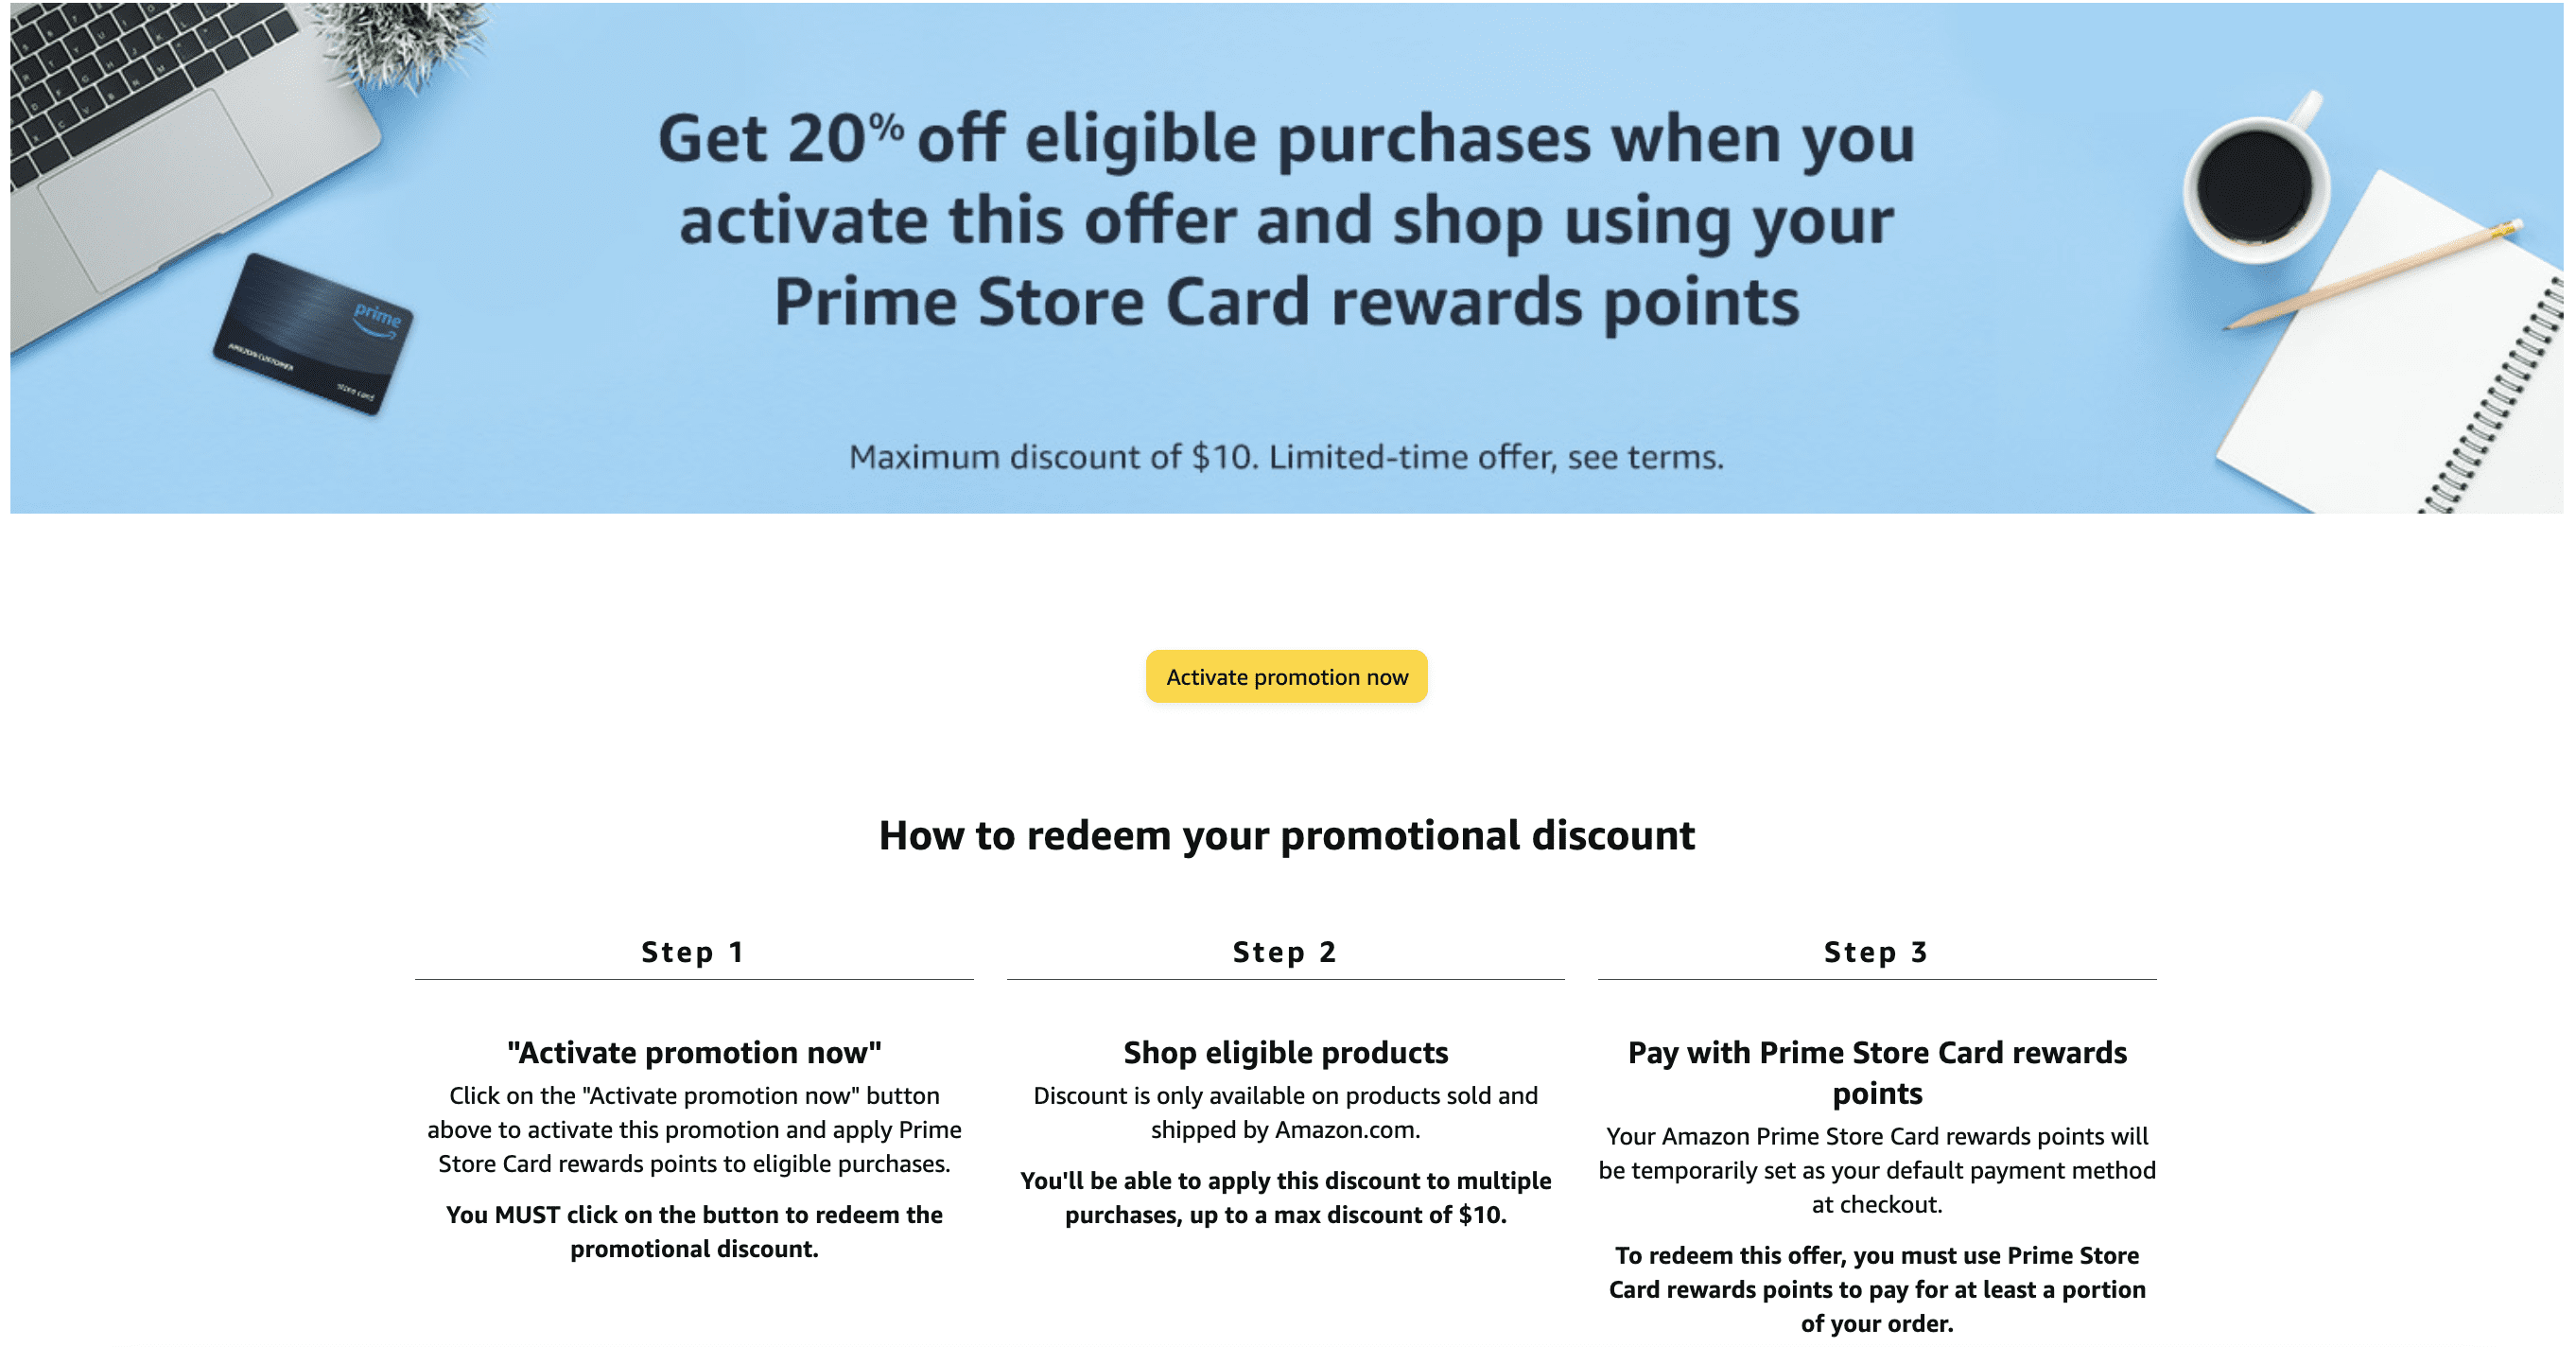 Expired]  Prime Synchrony Card: Use 1 Point & Get 20% Off